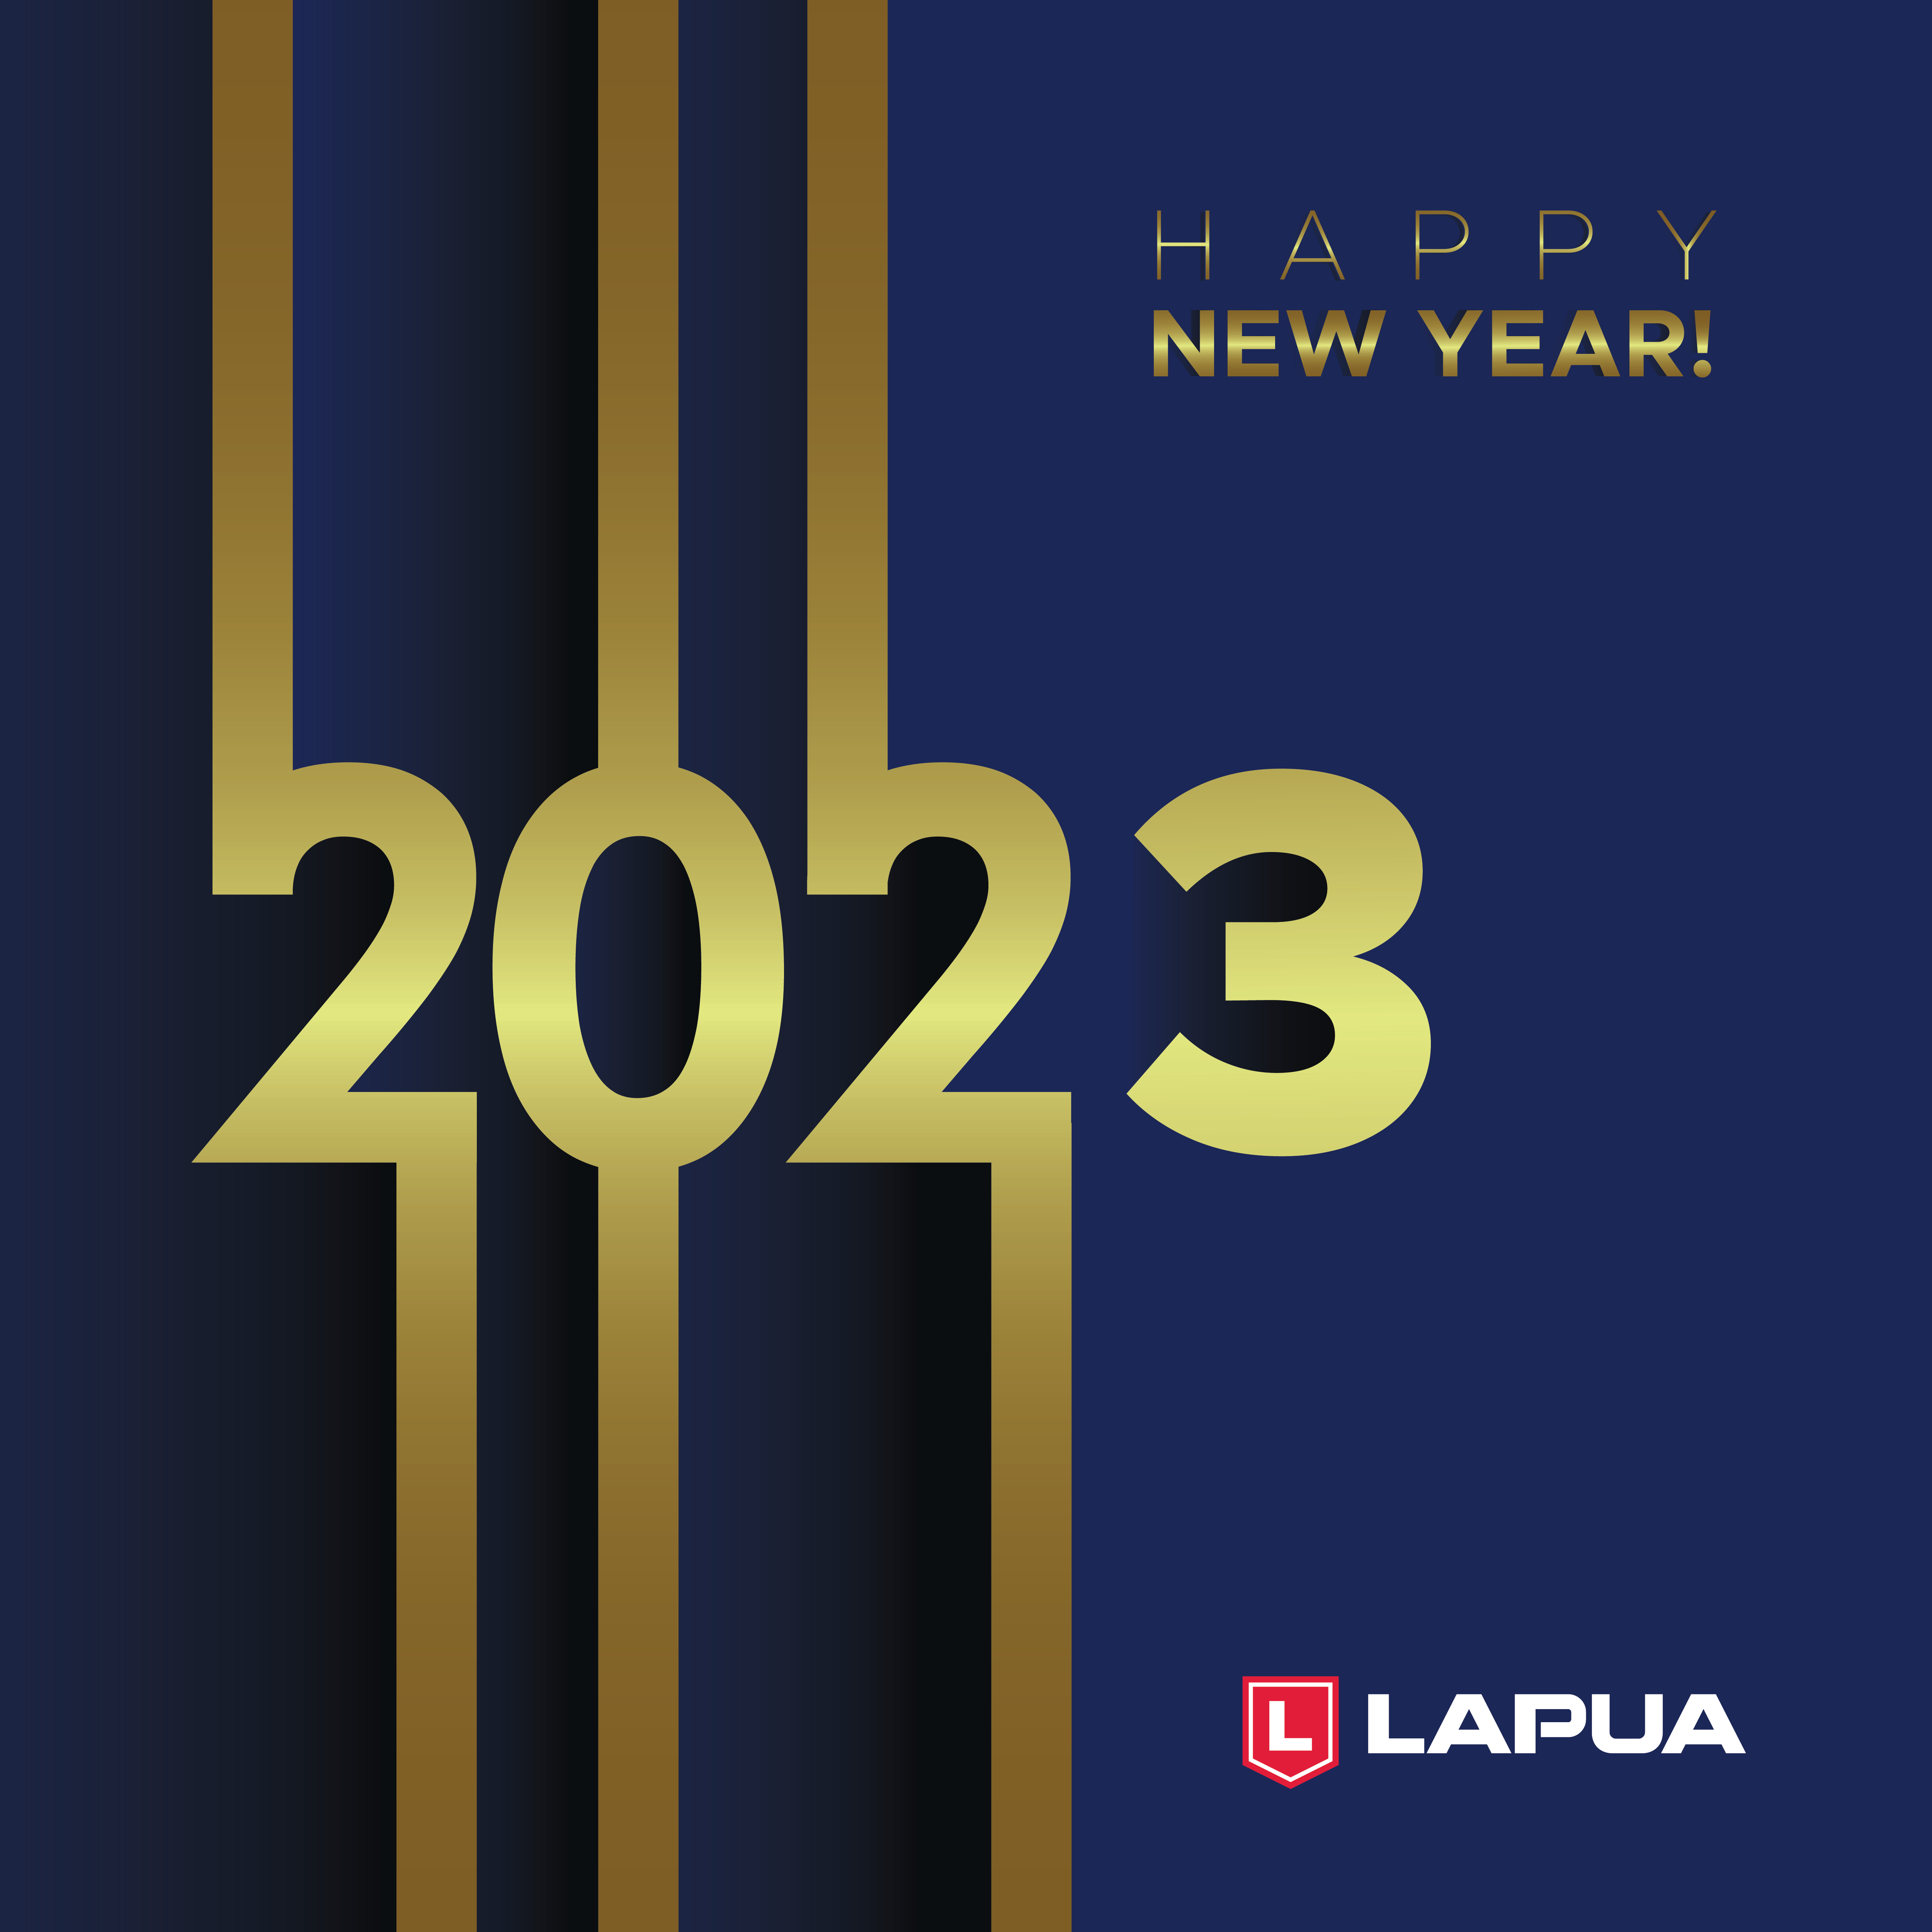 Lapua 100 years wishes you a happy new year